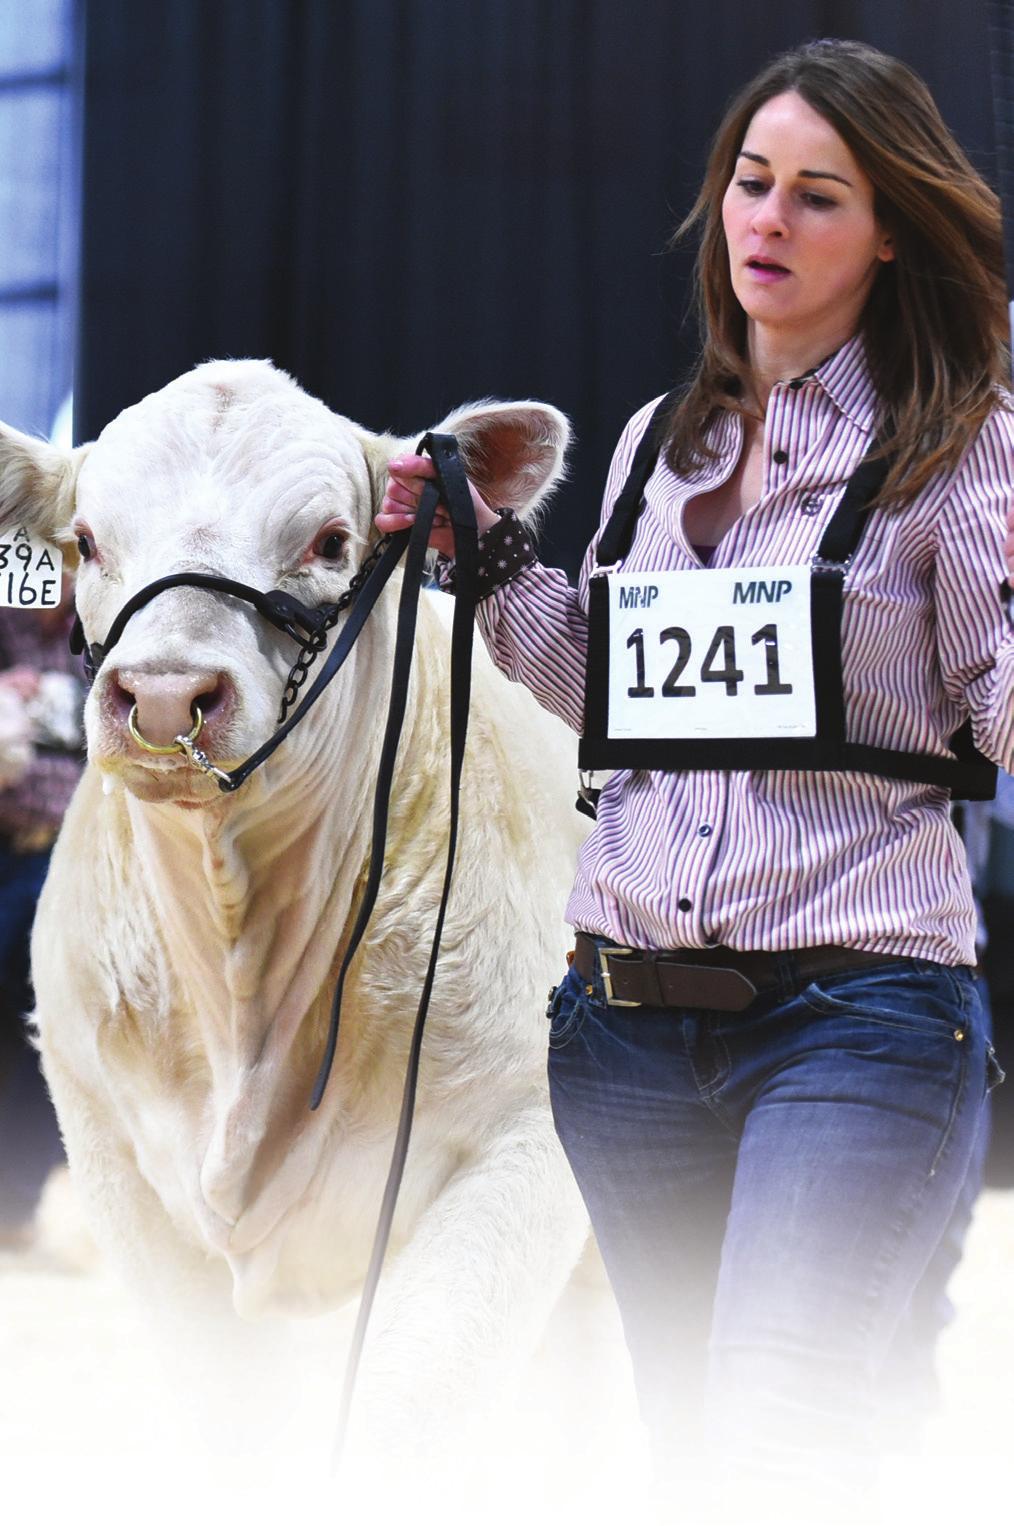 Located in Edmonton, Alberta, Northlands is one of Canada s oldest and most established agriculture societies and produces many events including Canada s premier agriculture